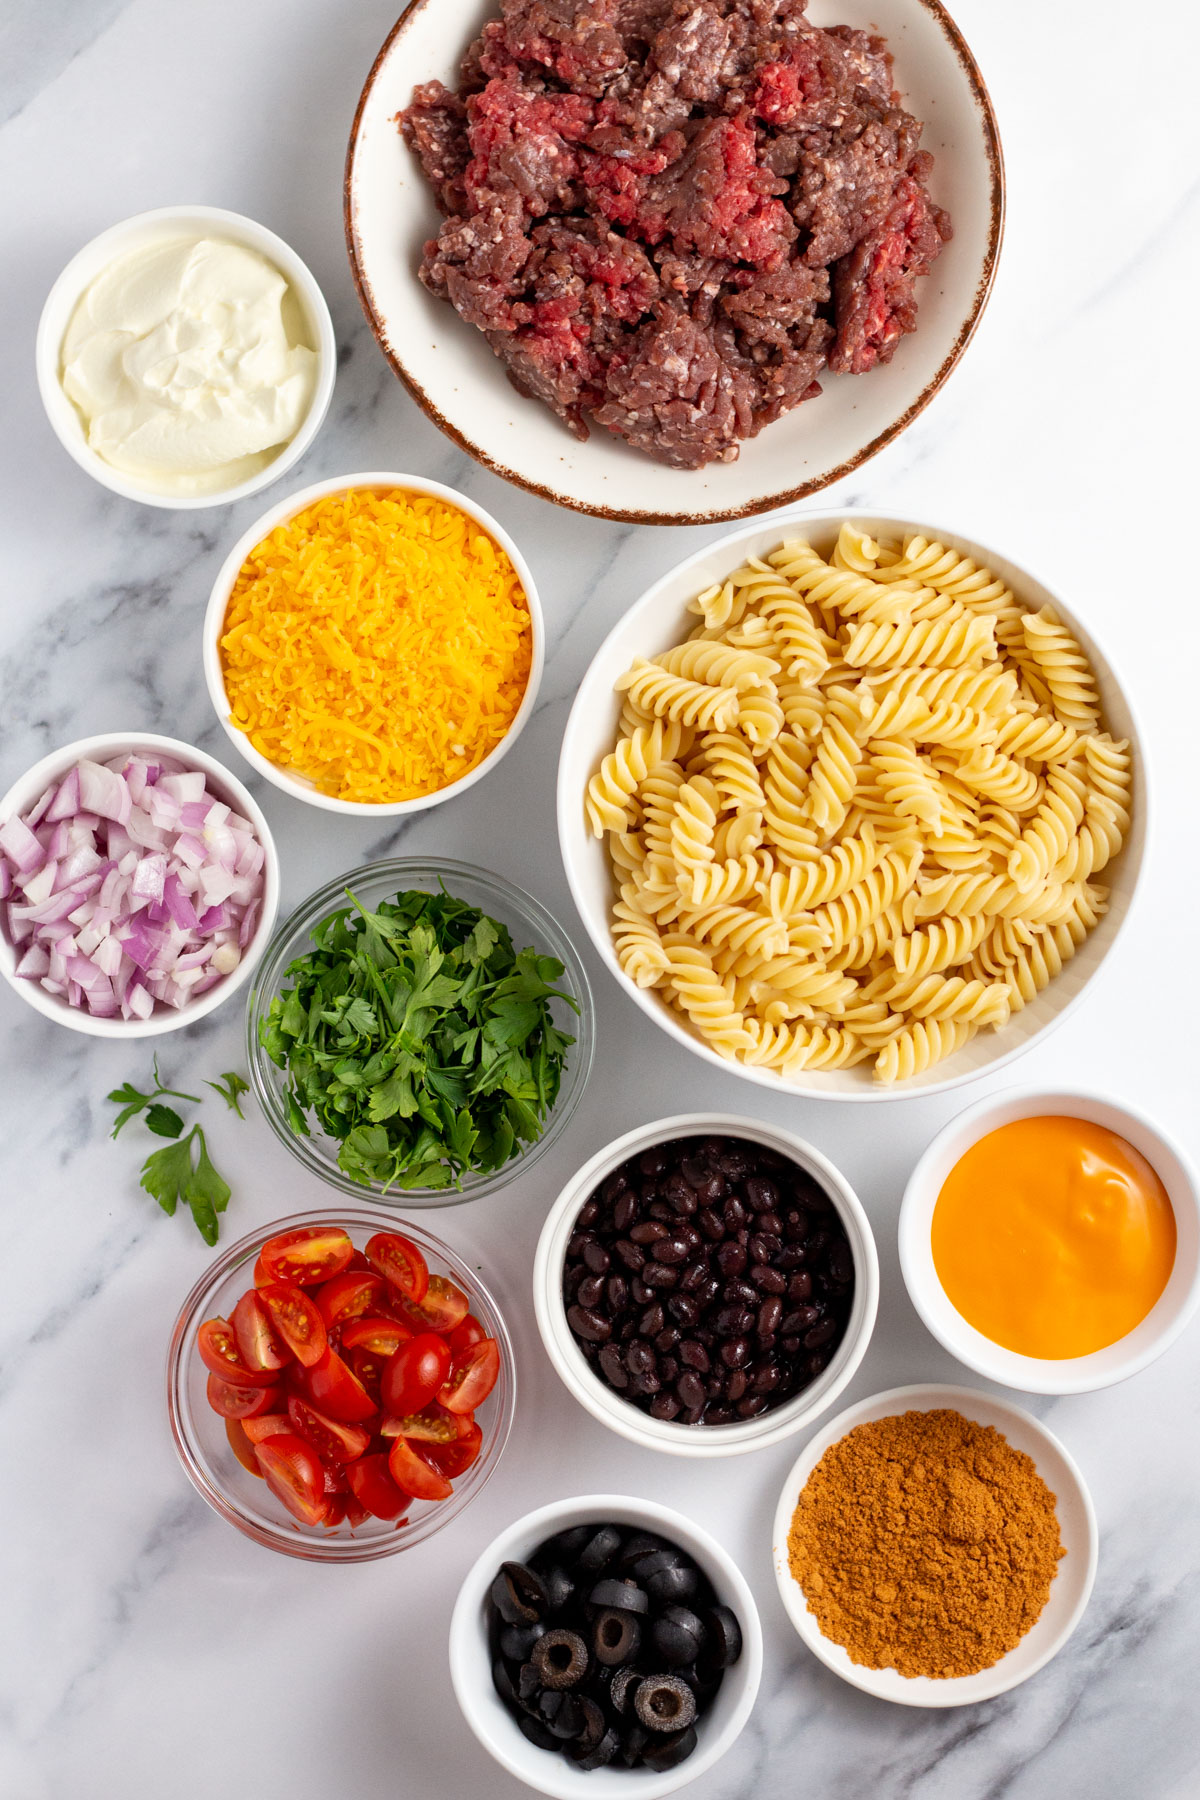 This quick and easy salad is ready in under thirty minutes and will definitely hit the spot! It's full of all the fresh flavors of taco night packed into a simple, delicious, pasta salad. The taco pasta salad is a breeze to make gluten free and is a perfect side for any meal, potluck, or family gathering. #tacosalad #pastasalad #glutenfree